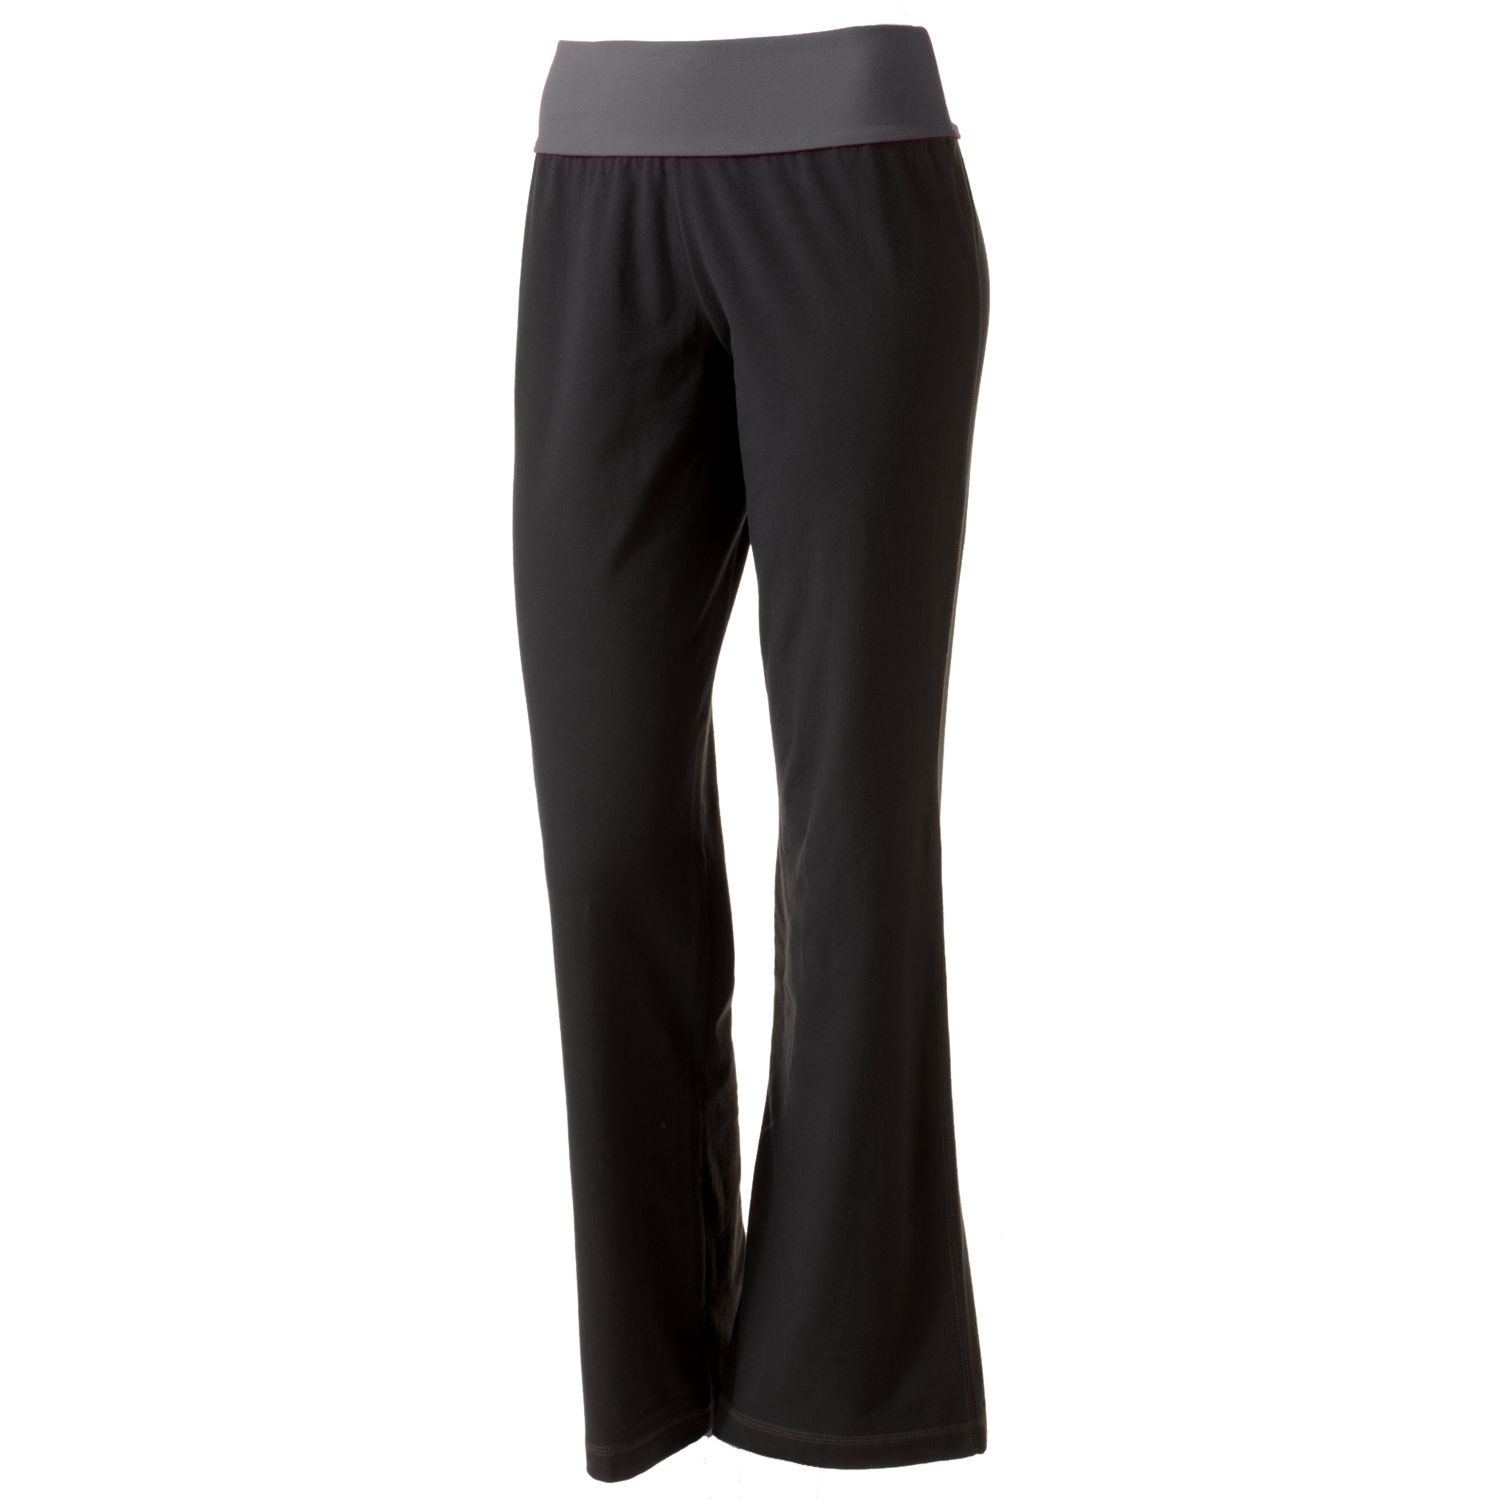 tek gear fit and flare yoga pants